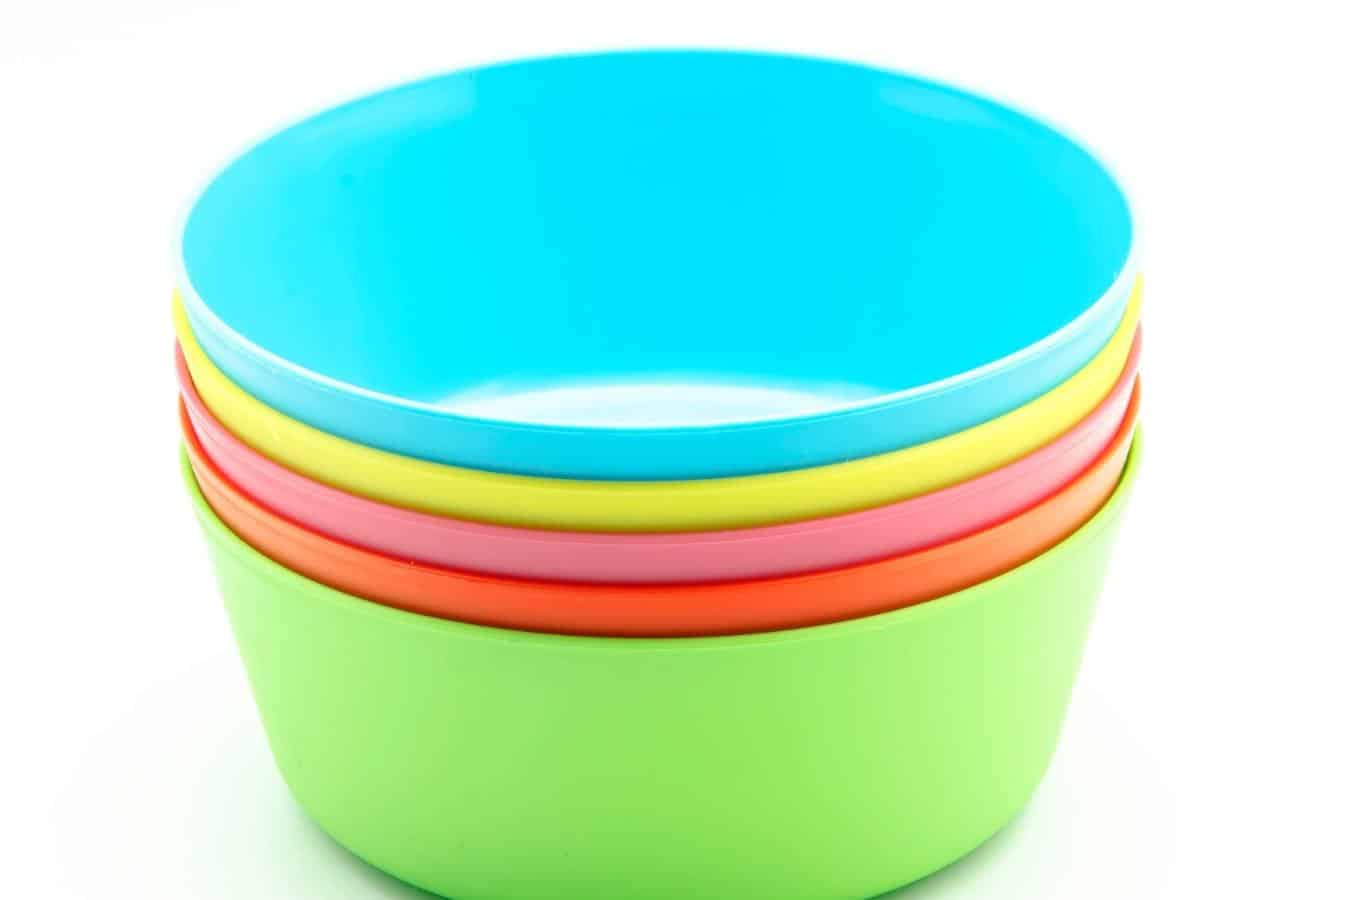 assorted colored plastic bowls